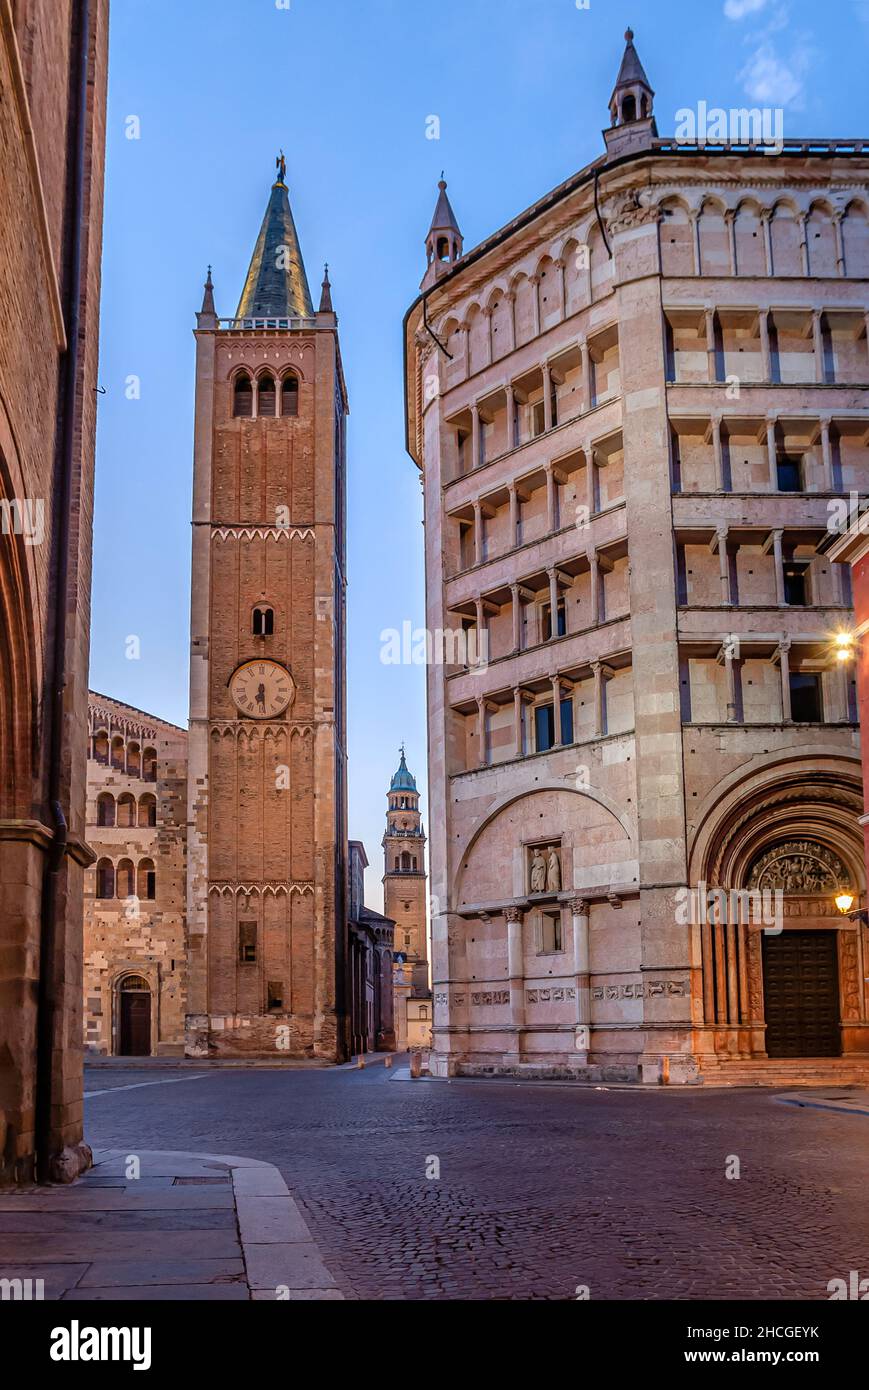 Historic architecture in the old town of Parma at dawn, Emilia-Romagna, Italy Stock Photo